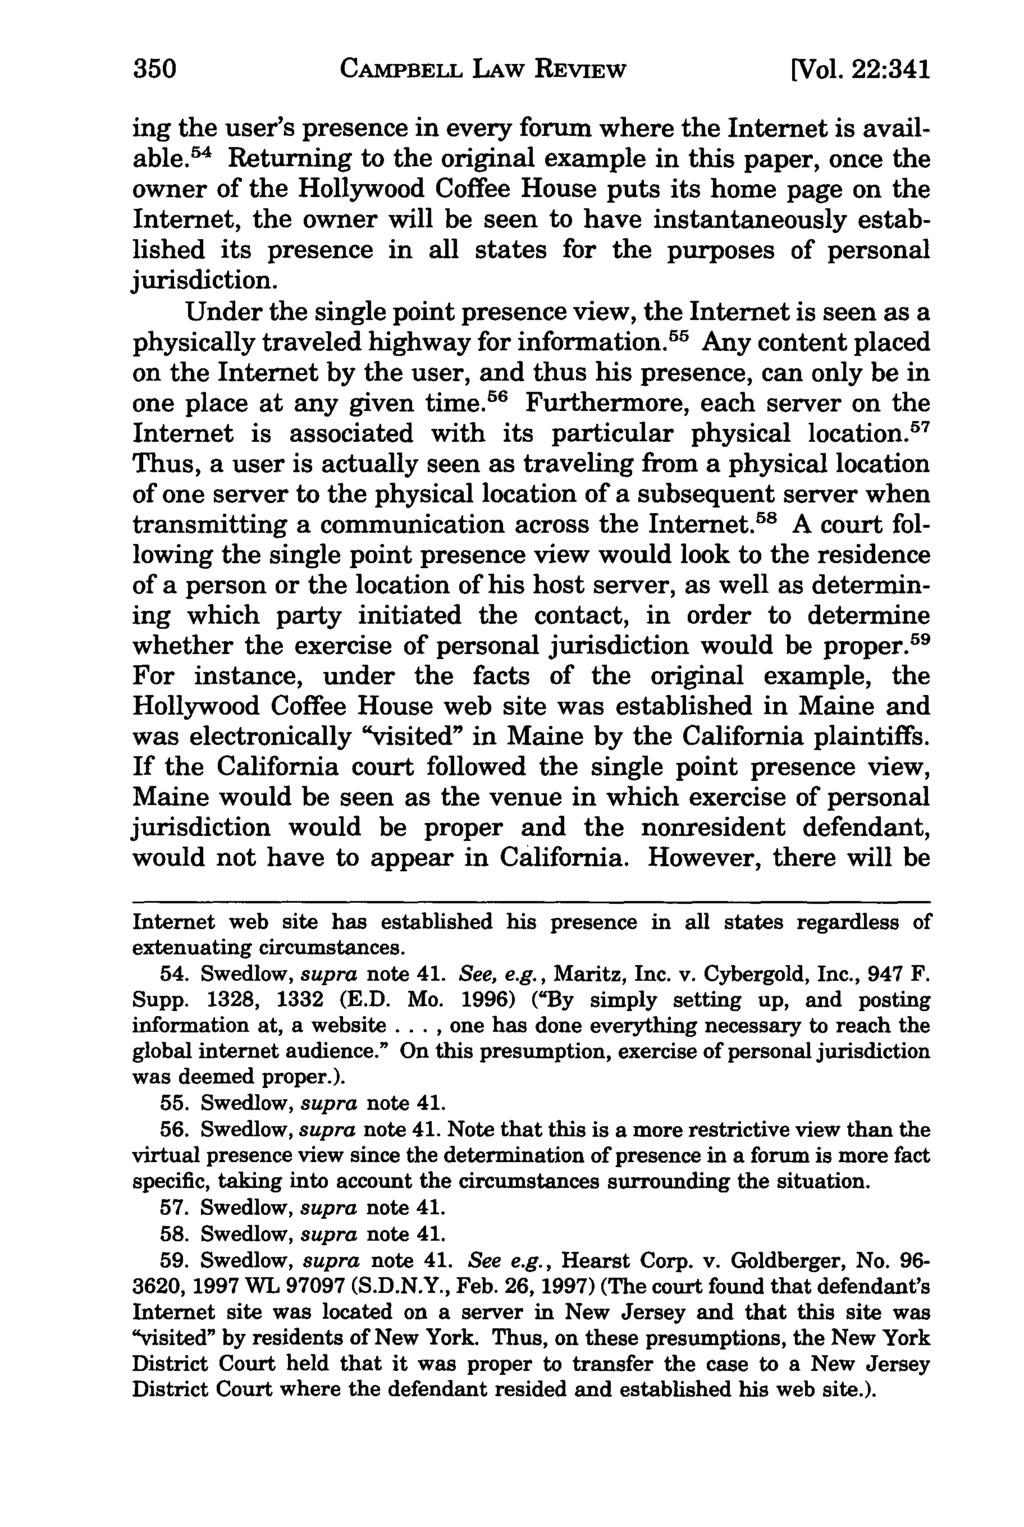 350 Campbell Law Review, Vol. 22, Iss. 2 [2000], Art. 3 CAMPBELL LAW REVIEW [Vol. 22:341 ing the user's presence in every forum where the Internet is available.